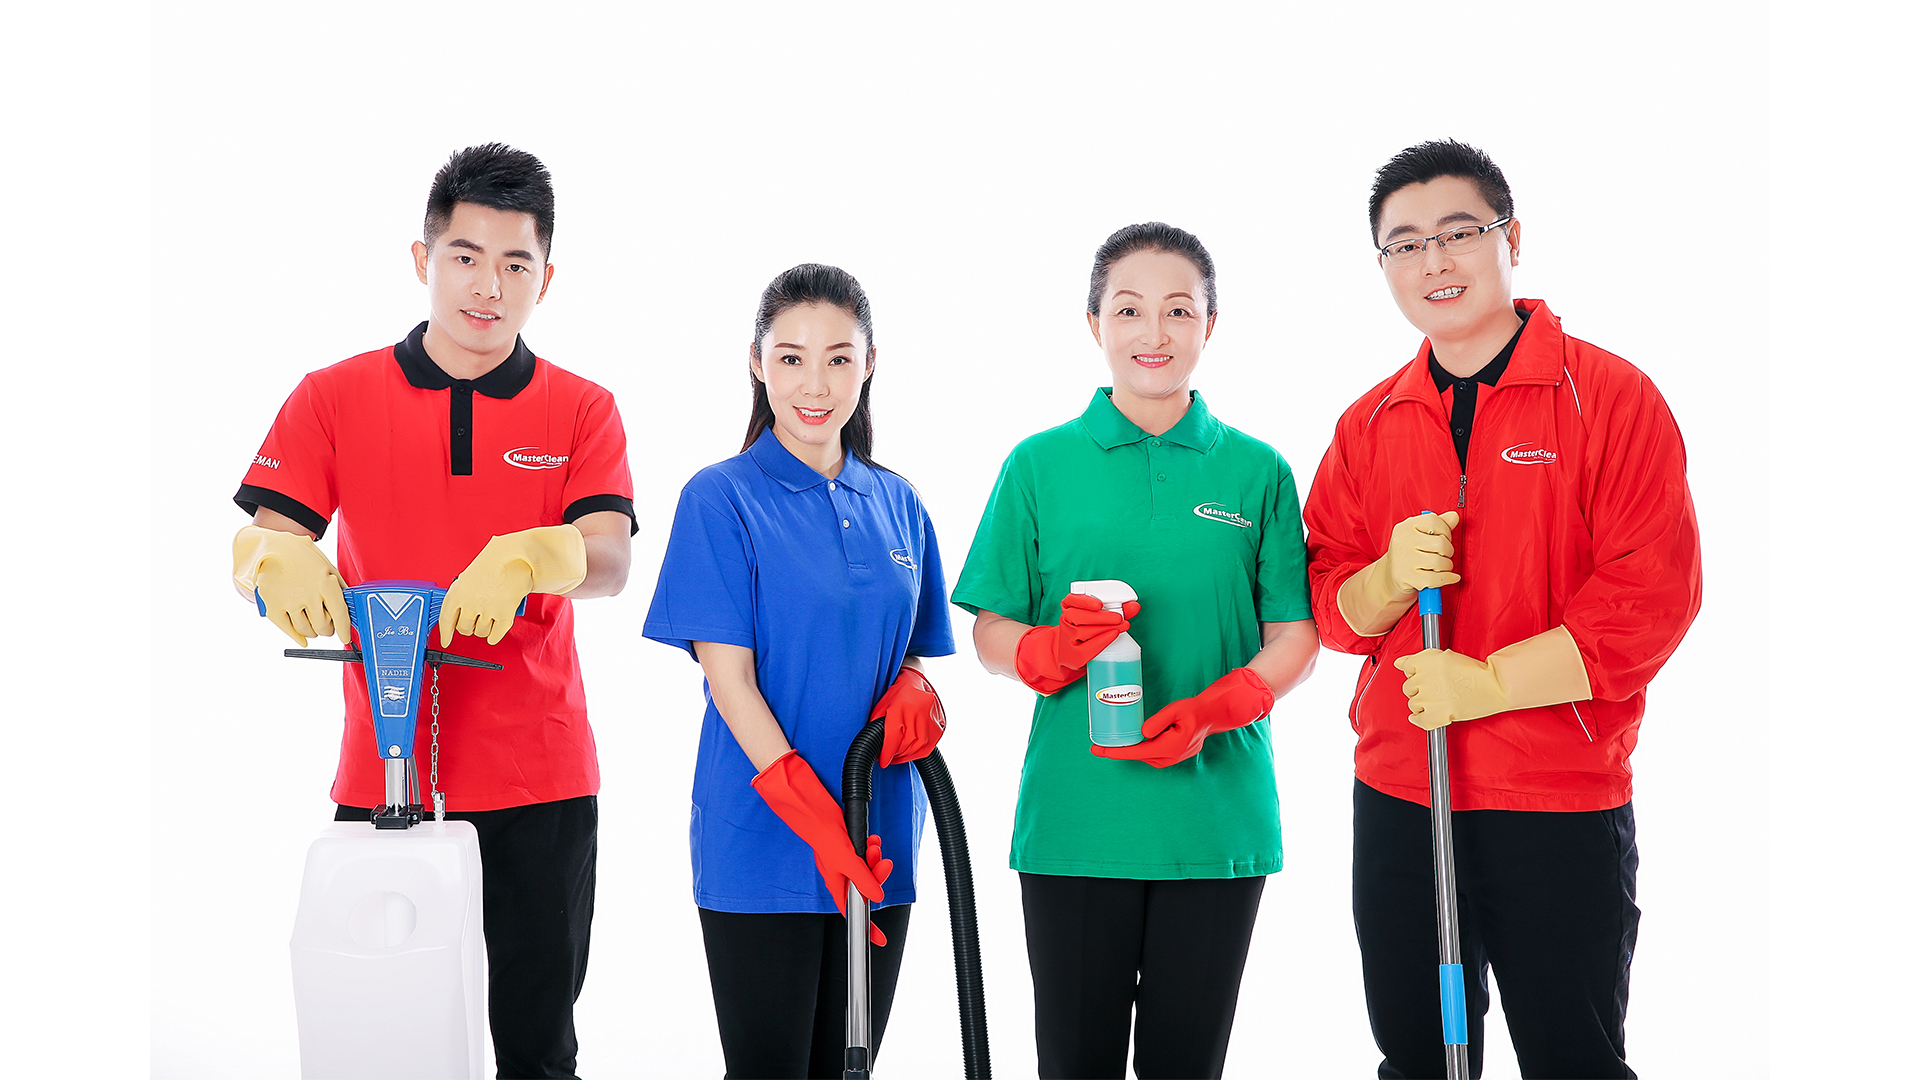 It is a Brand and Service Shooting for Hong Kong Cleaning company by D2 Studio Branding Agency Brand Identity and Design Hong Kong and Guangzhou China who does Brand and Service Shooting. 5